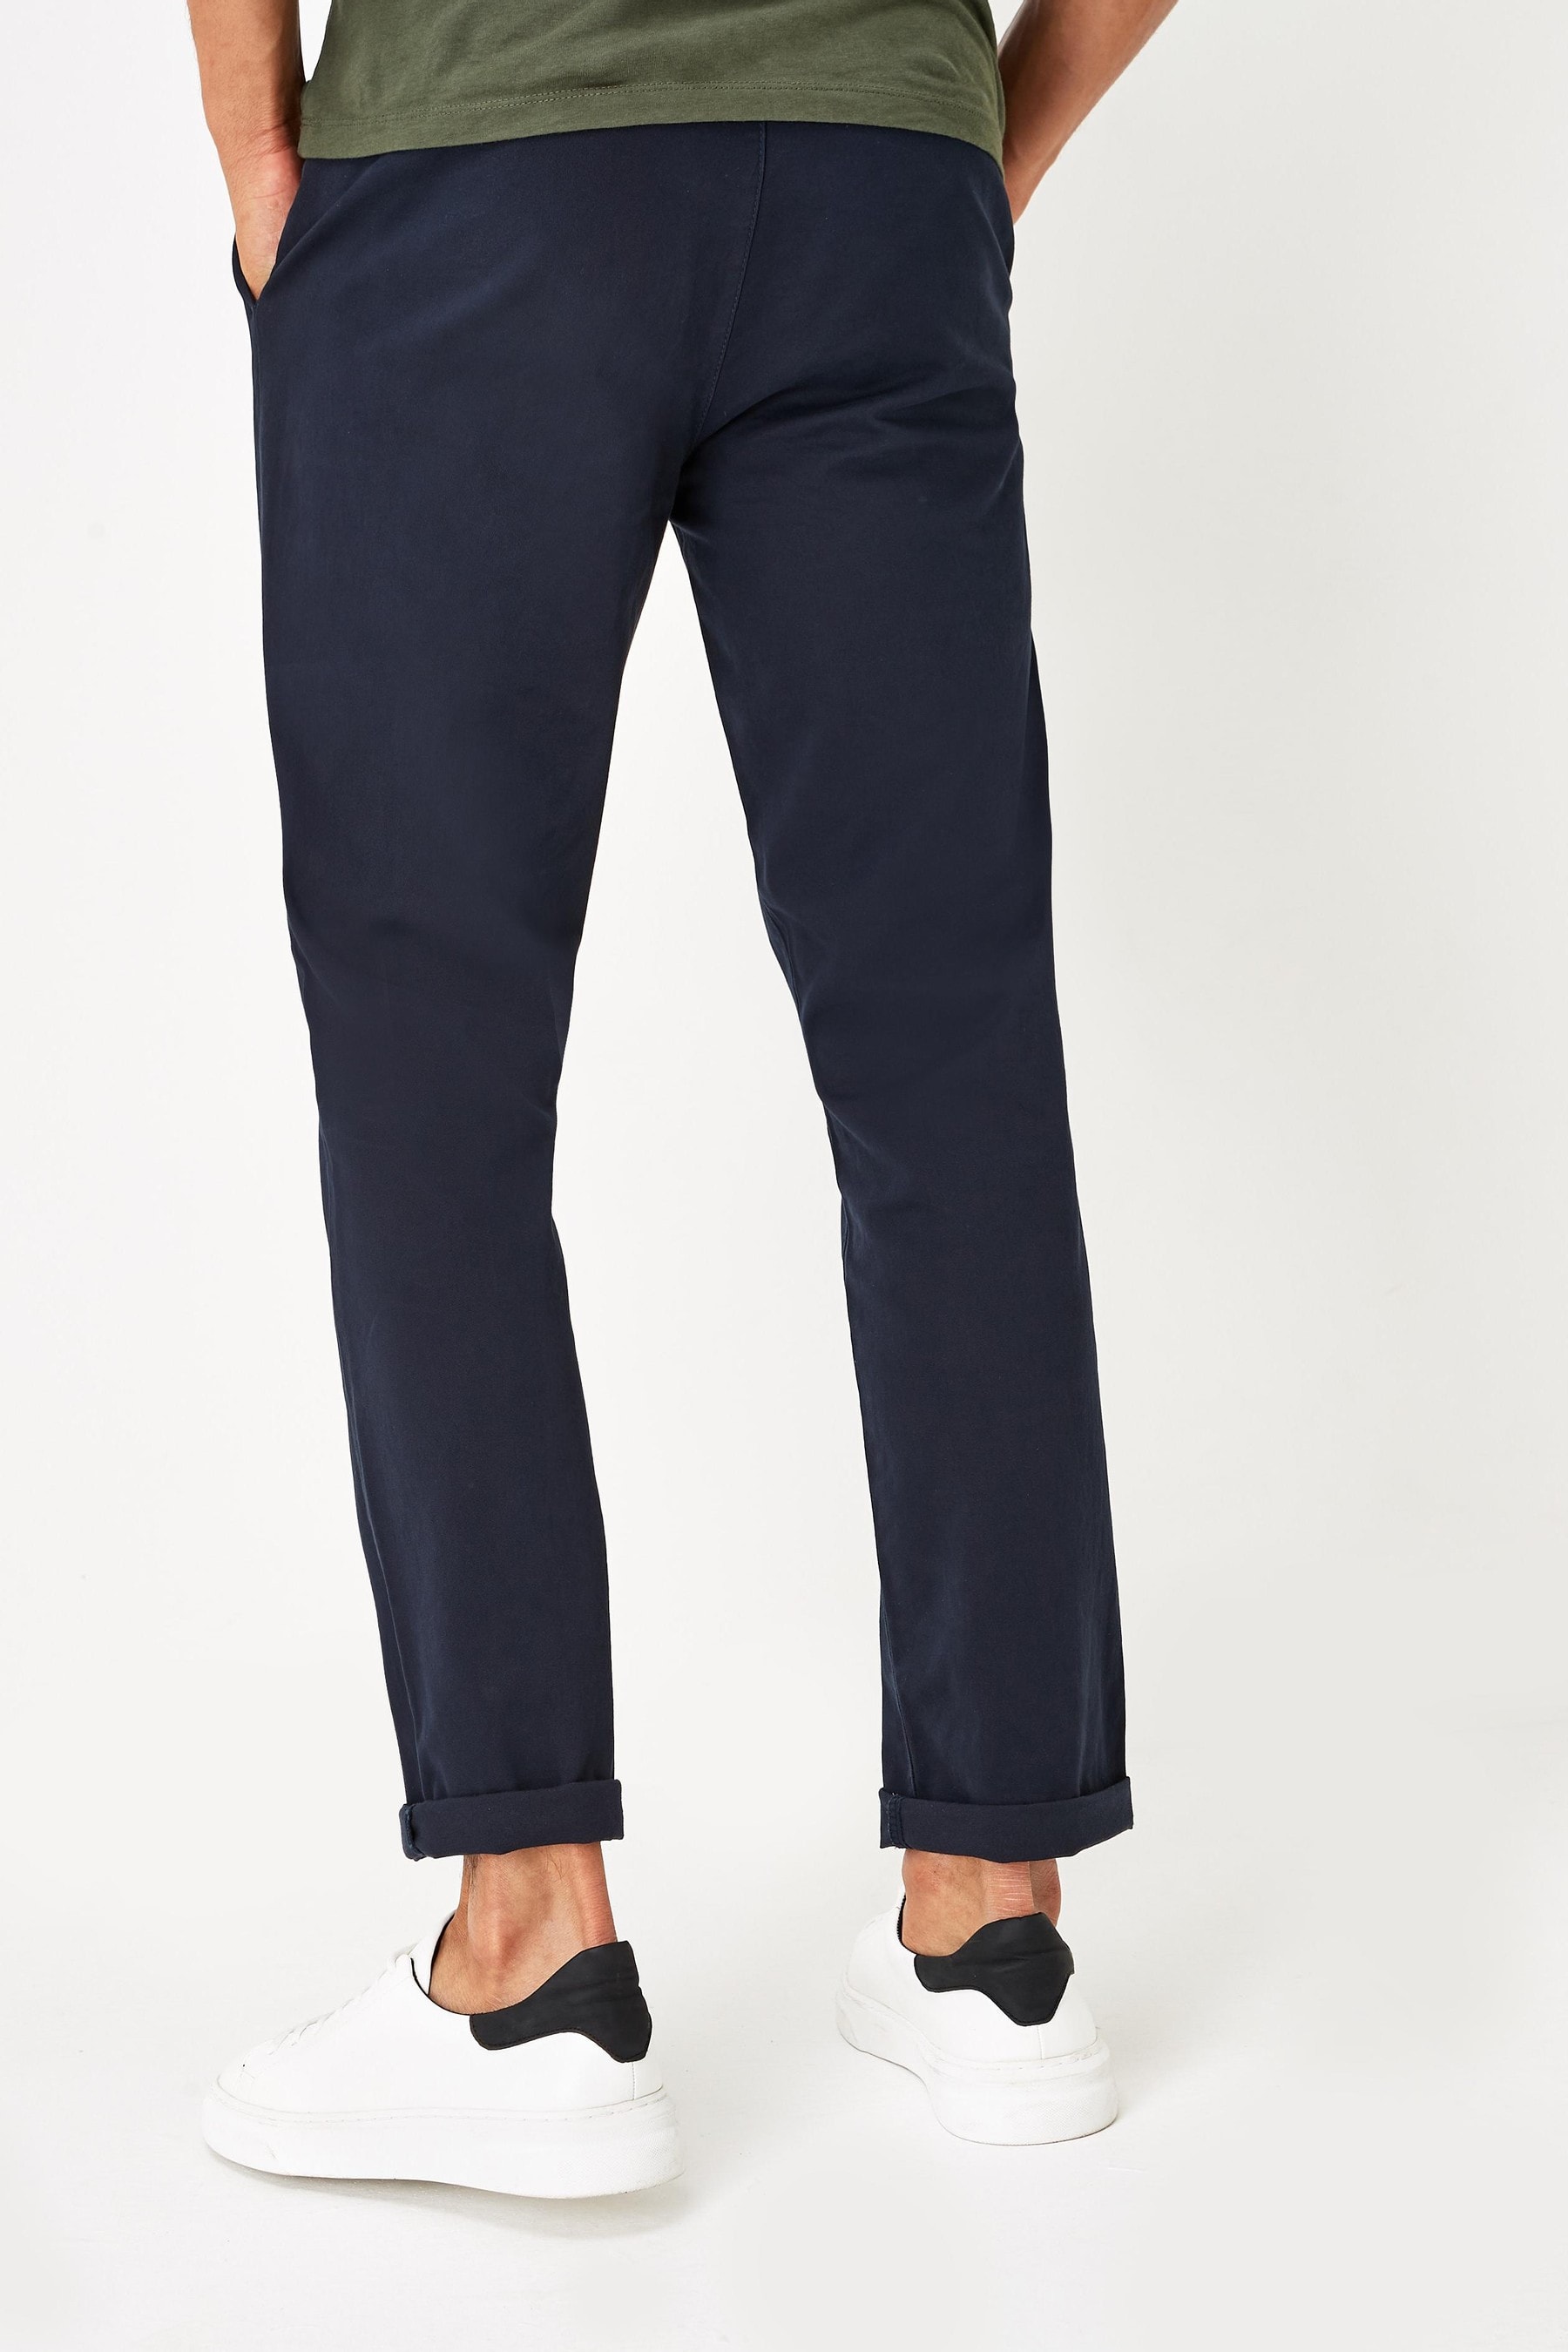 Buy Dark Blue Straight Fit Stretch Chinos from the Next UK online shop